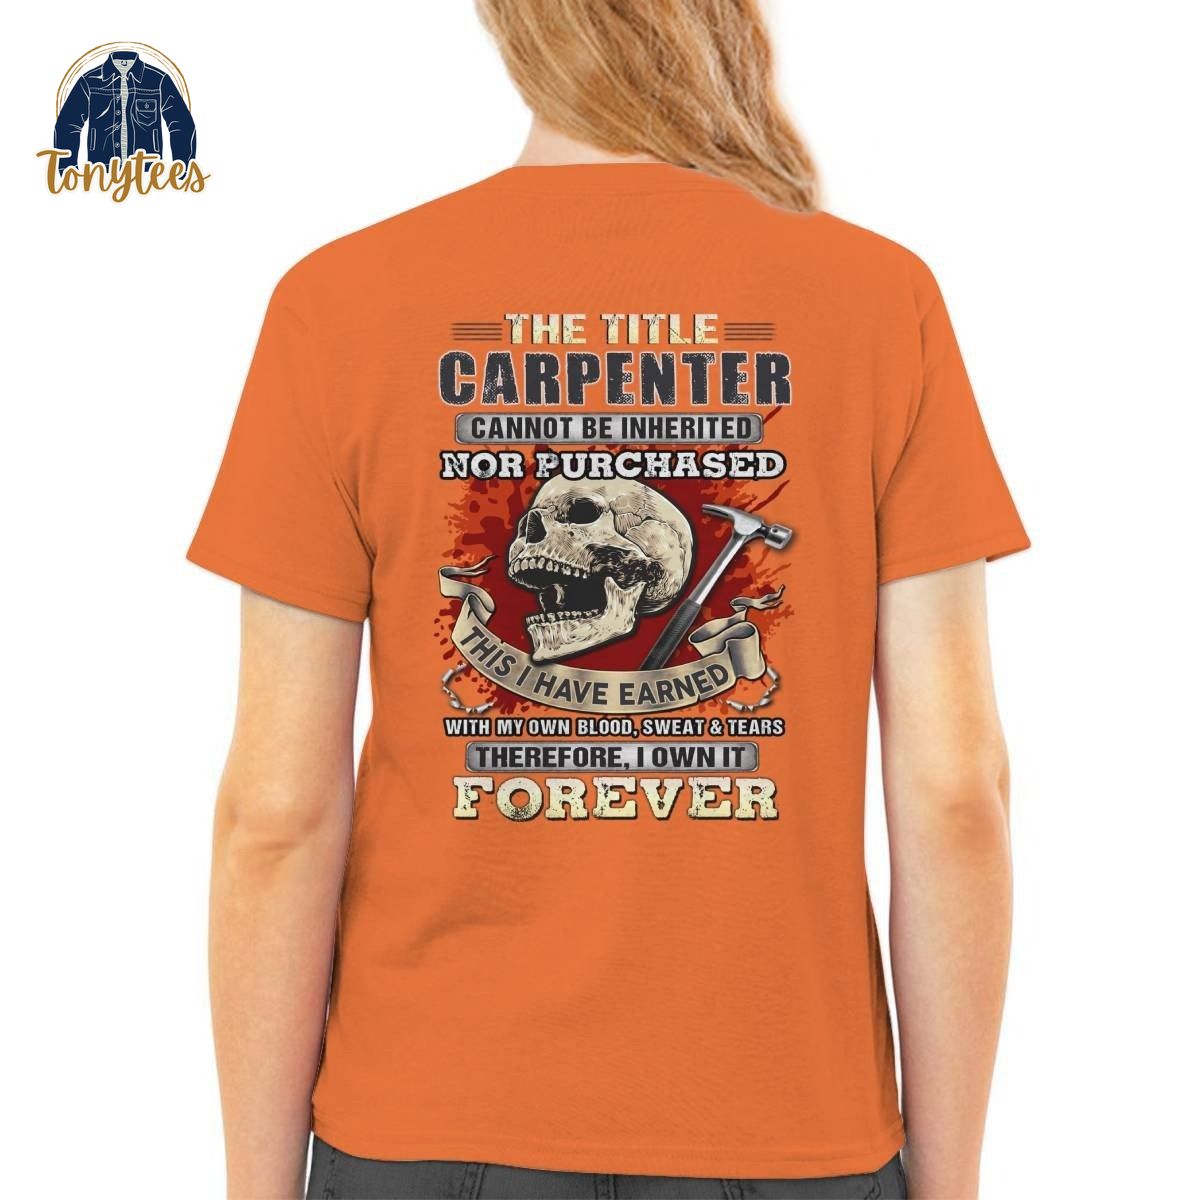 The title carpenter cannot be inherited nor purchased shirt